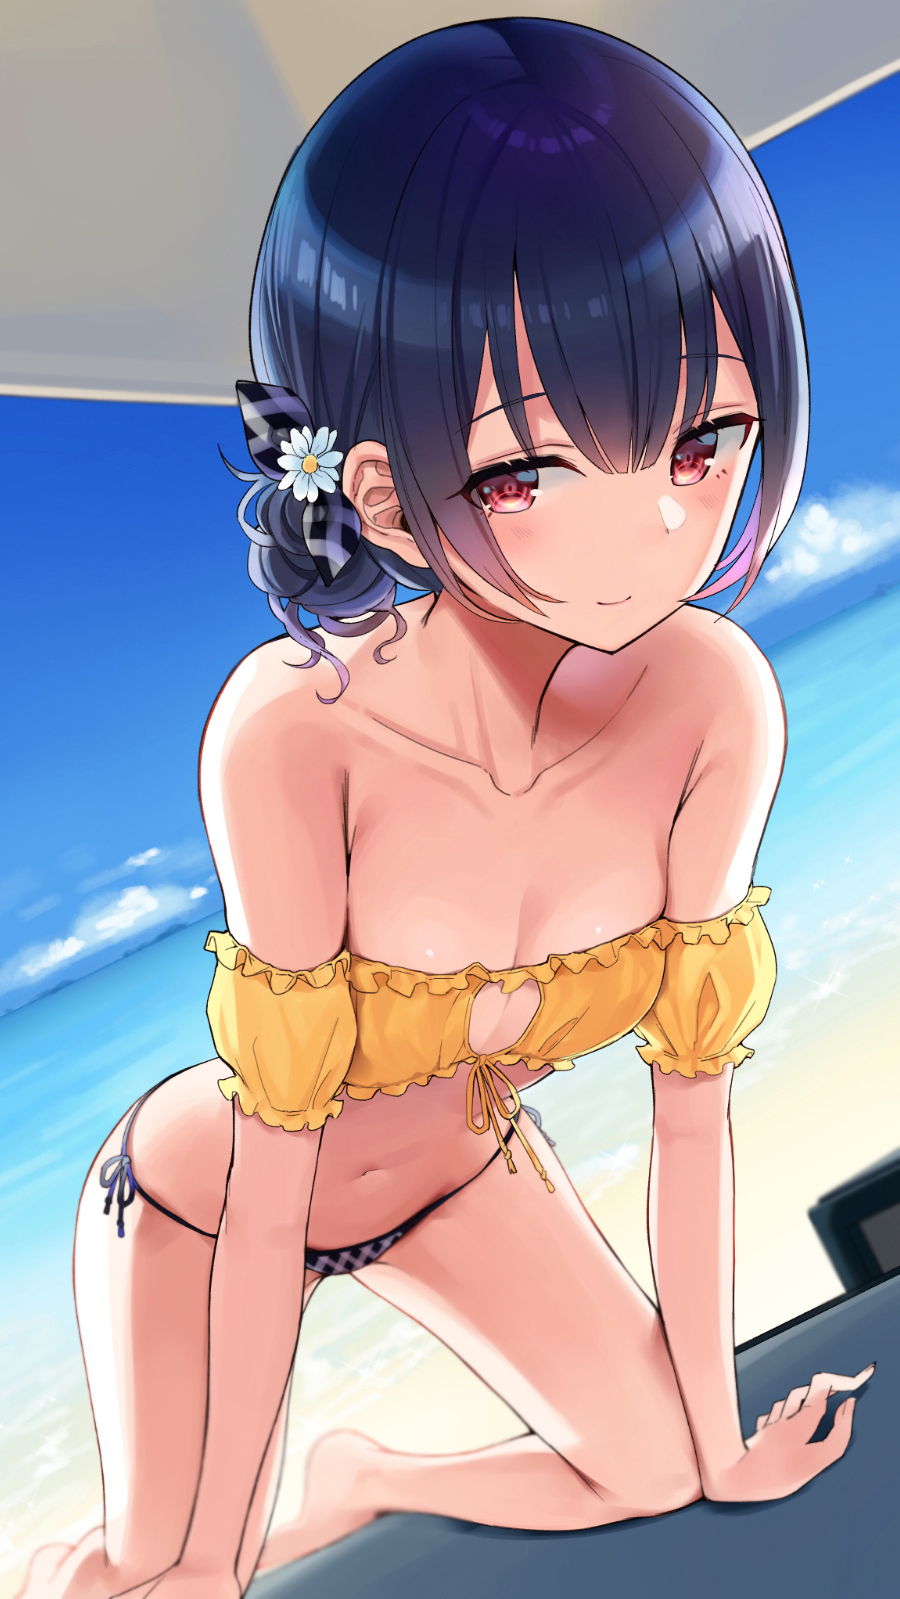 __morino_rinze_idolmaster_and_1_more_drawn_by_mirei__c397be181958ab473c33f02d1d51f7ca.jpg